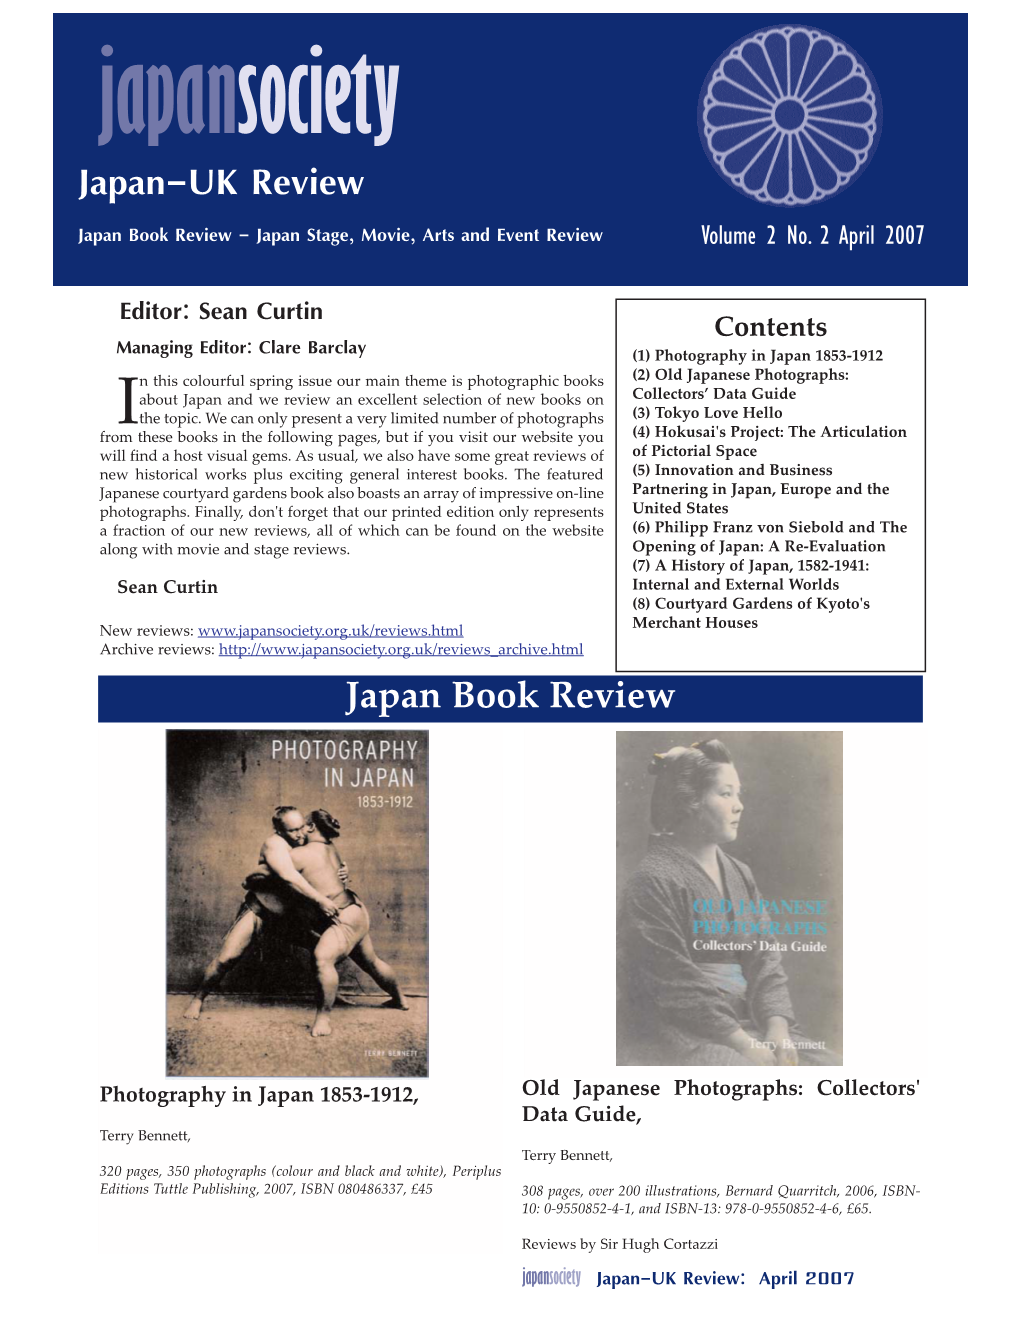 Japansociety Japan-UK Review Japan Book Review - Japan Stage, Movie, Arts and Event Review Volume 2 No